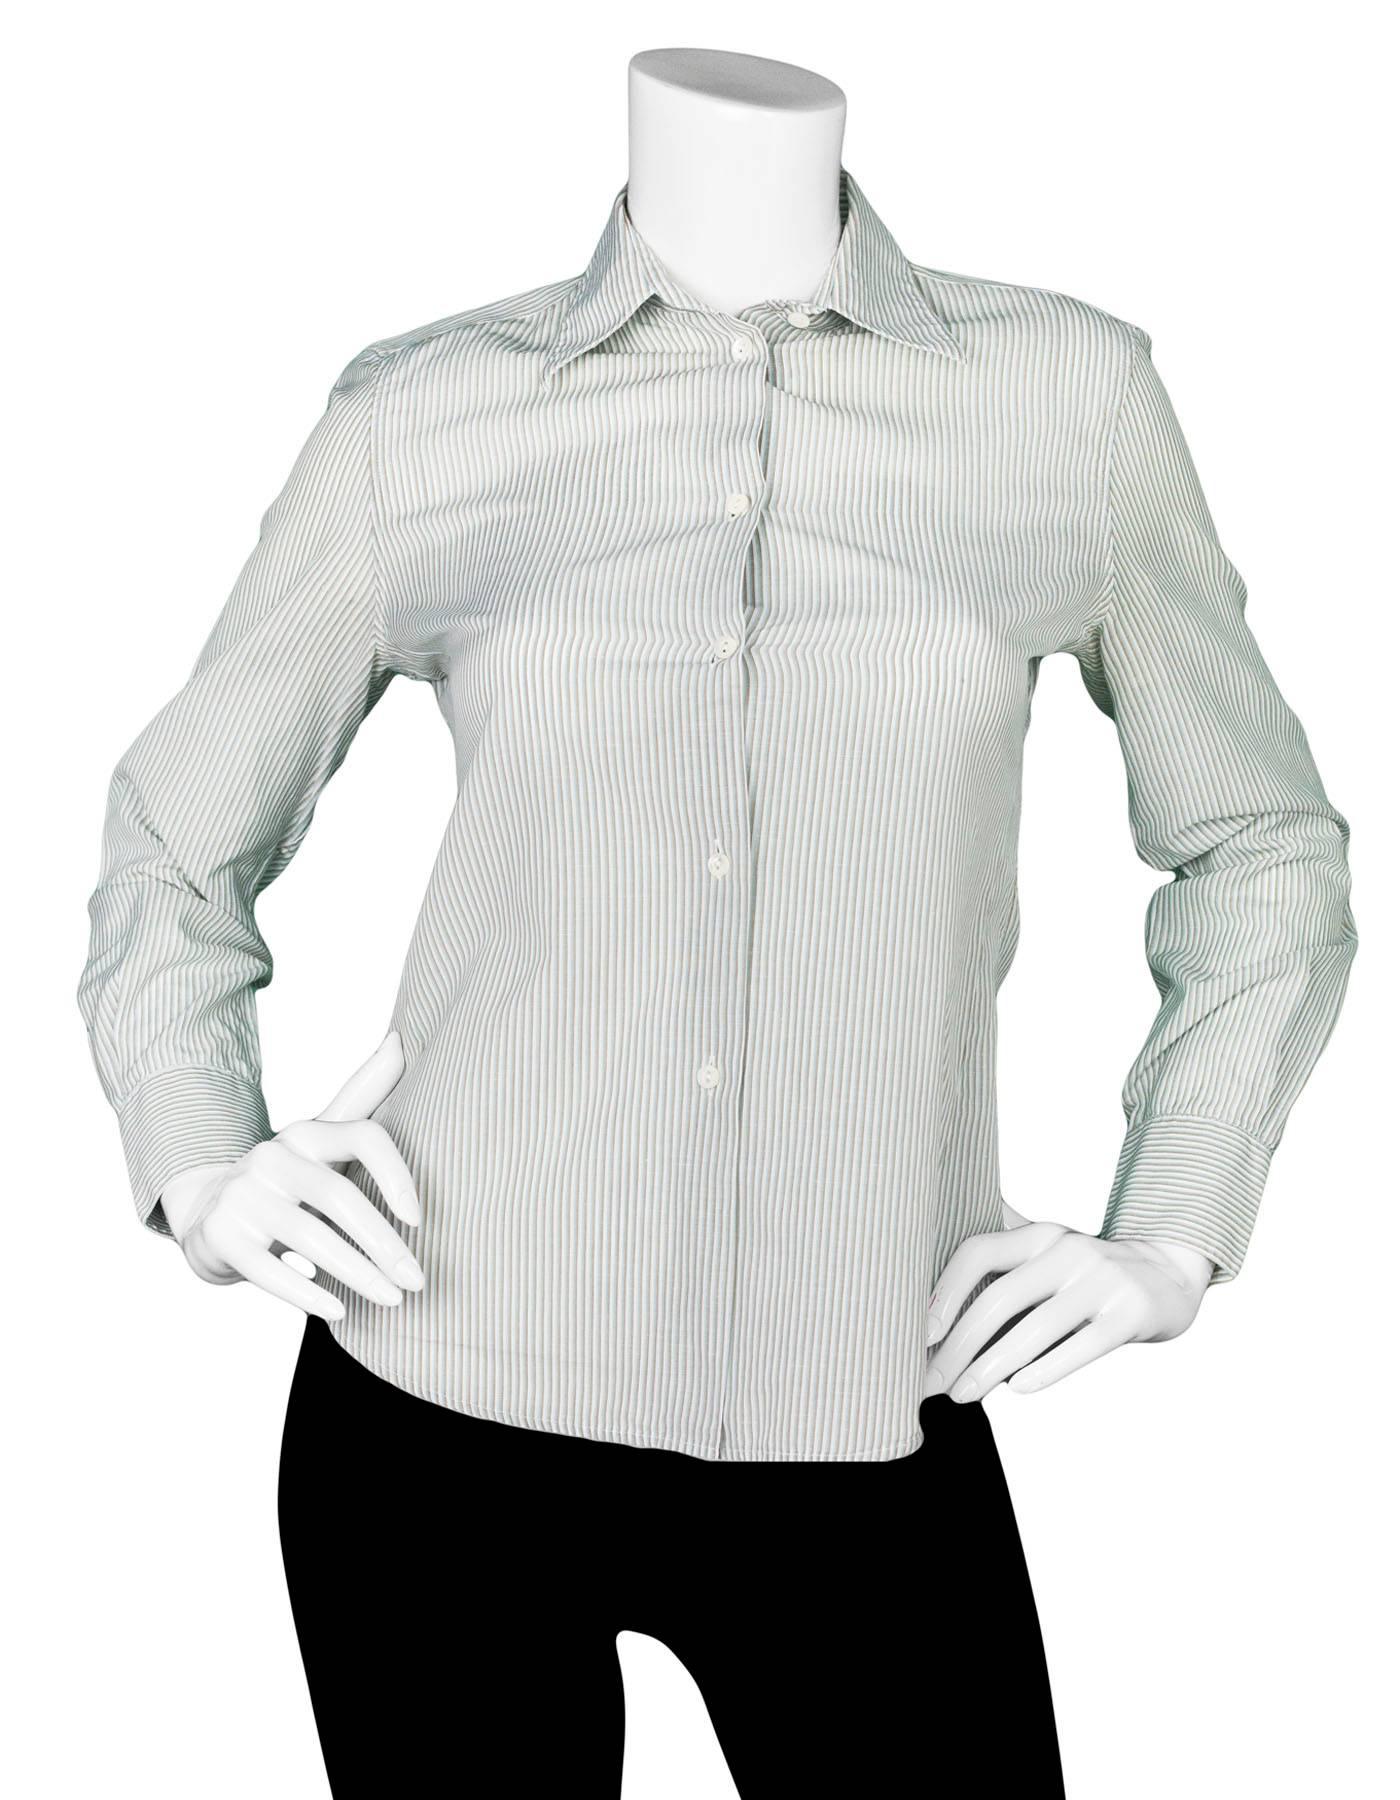 Loro Piana Pastel Stripe Button Down Top 

Made In: Italy
Color: White, pale blue, and taupe
Composition: 170% cotton, 30% flax
Lining: None
Closure/Opening: Button down front
Exterior Pockets: None
Interior Pockets: None
Overall Condition: